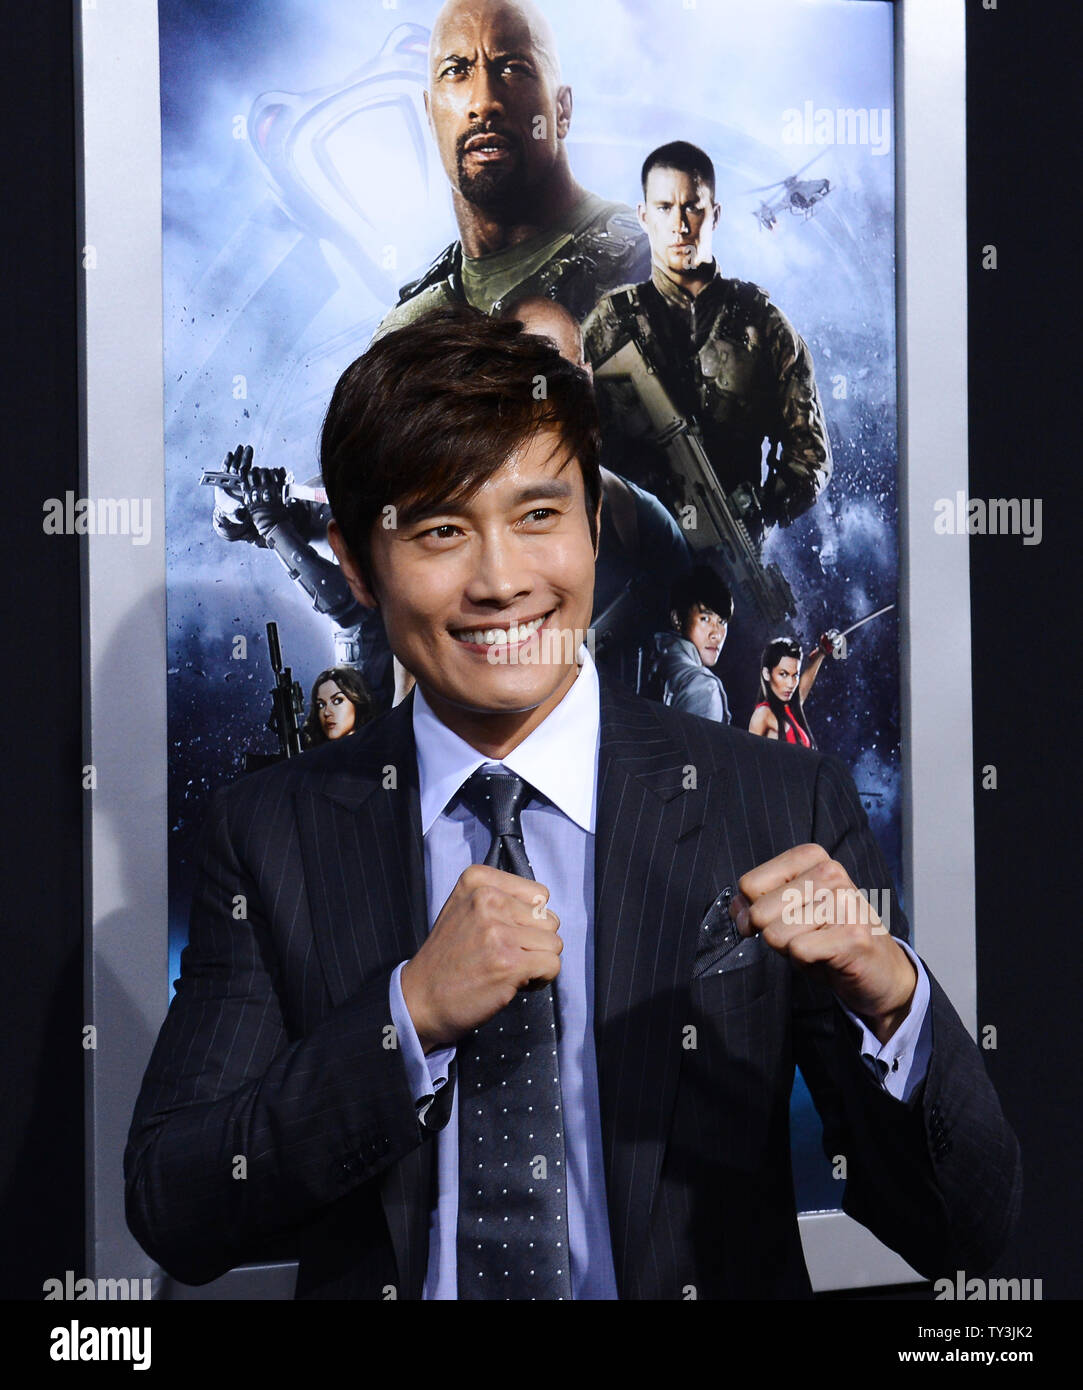 Byung-hun Lee, a cast member in the motion picture sci-fi thriller "G.I. Joe:  Retaliation", attends the premiere of the film at TCL Chinese Theatre in  the Hollywood section of Los Angeles on